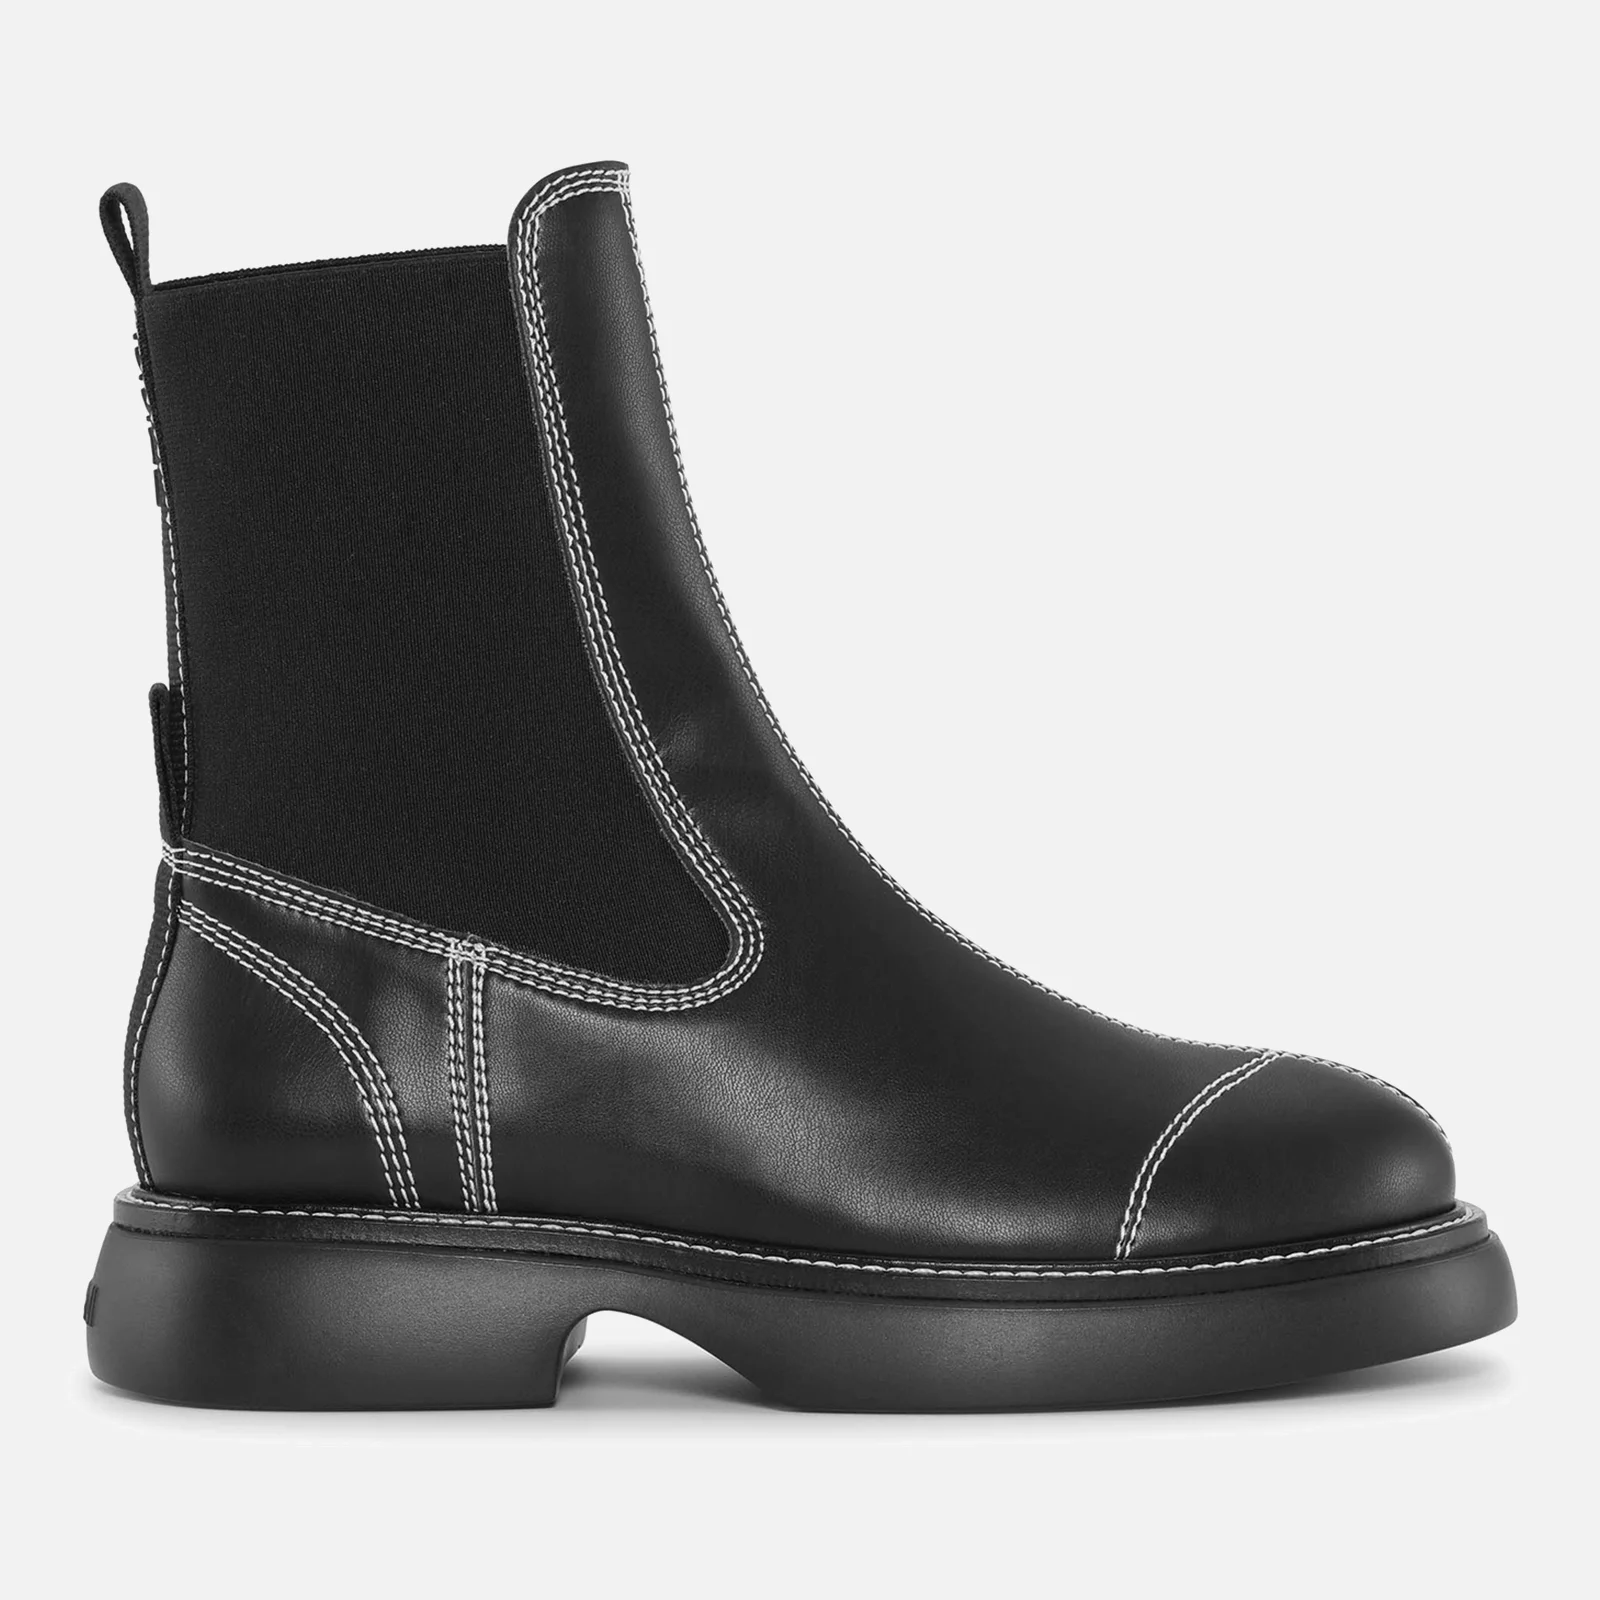 Ganni Women's Everyday Mid Faux Leather Chelsea Boots Image 1